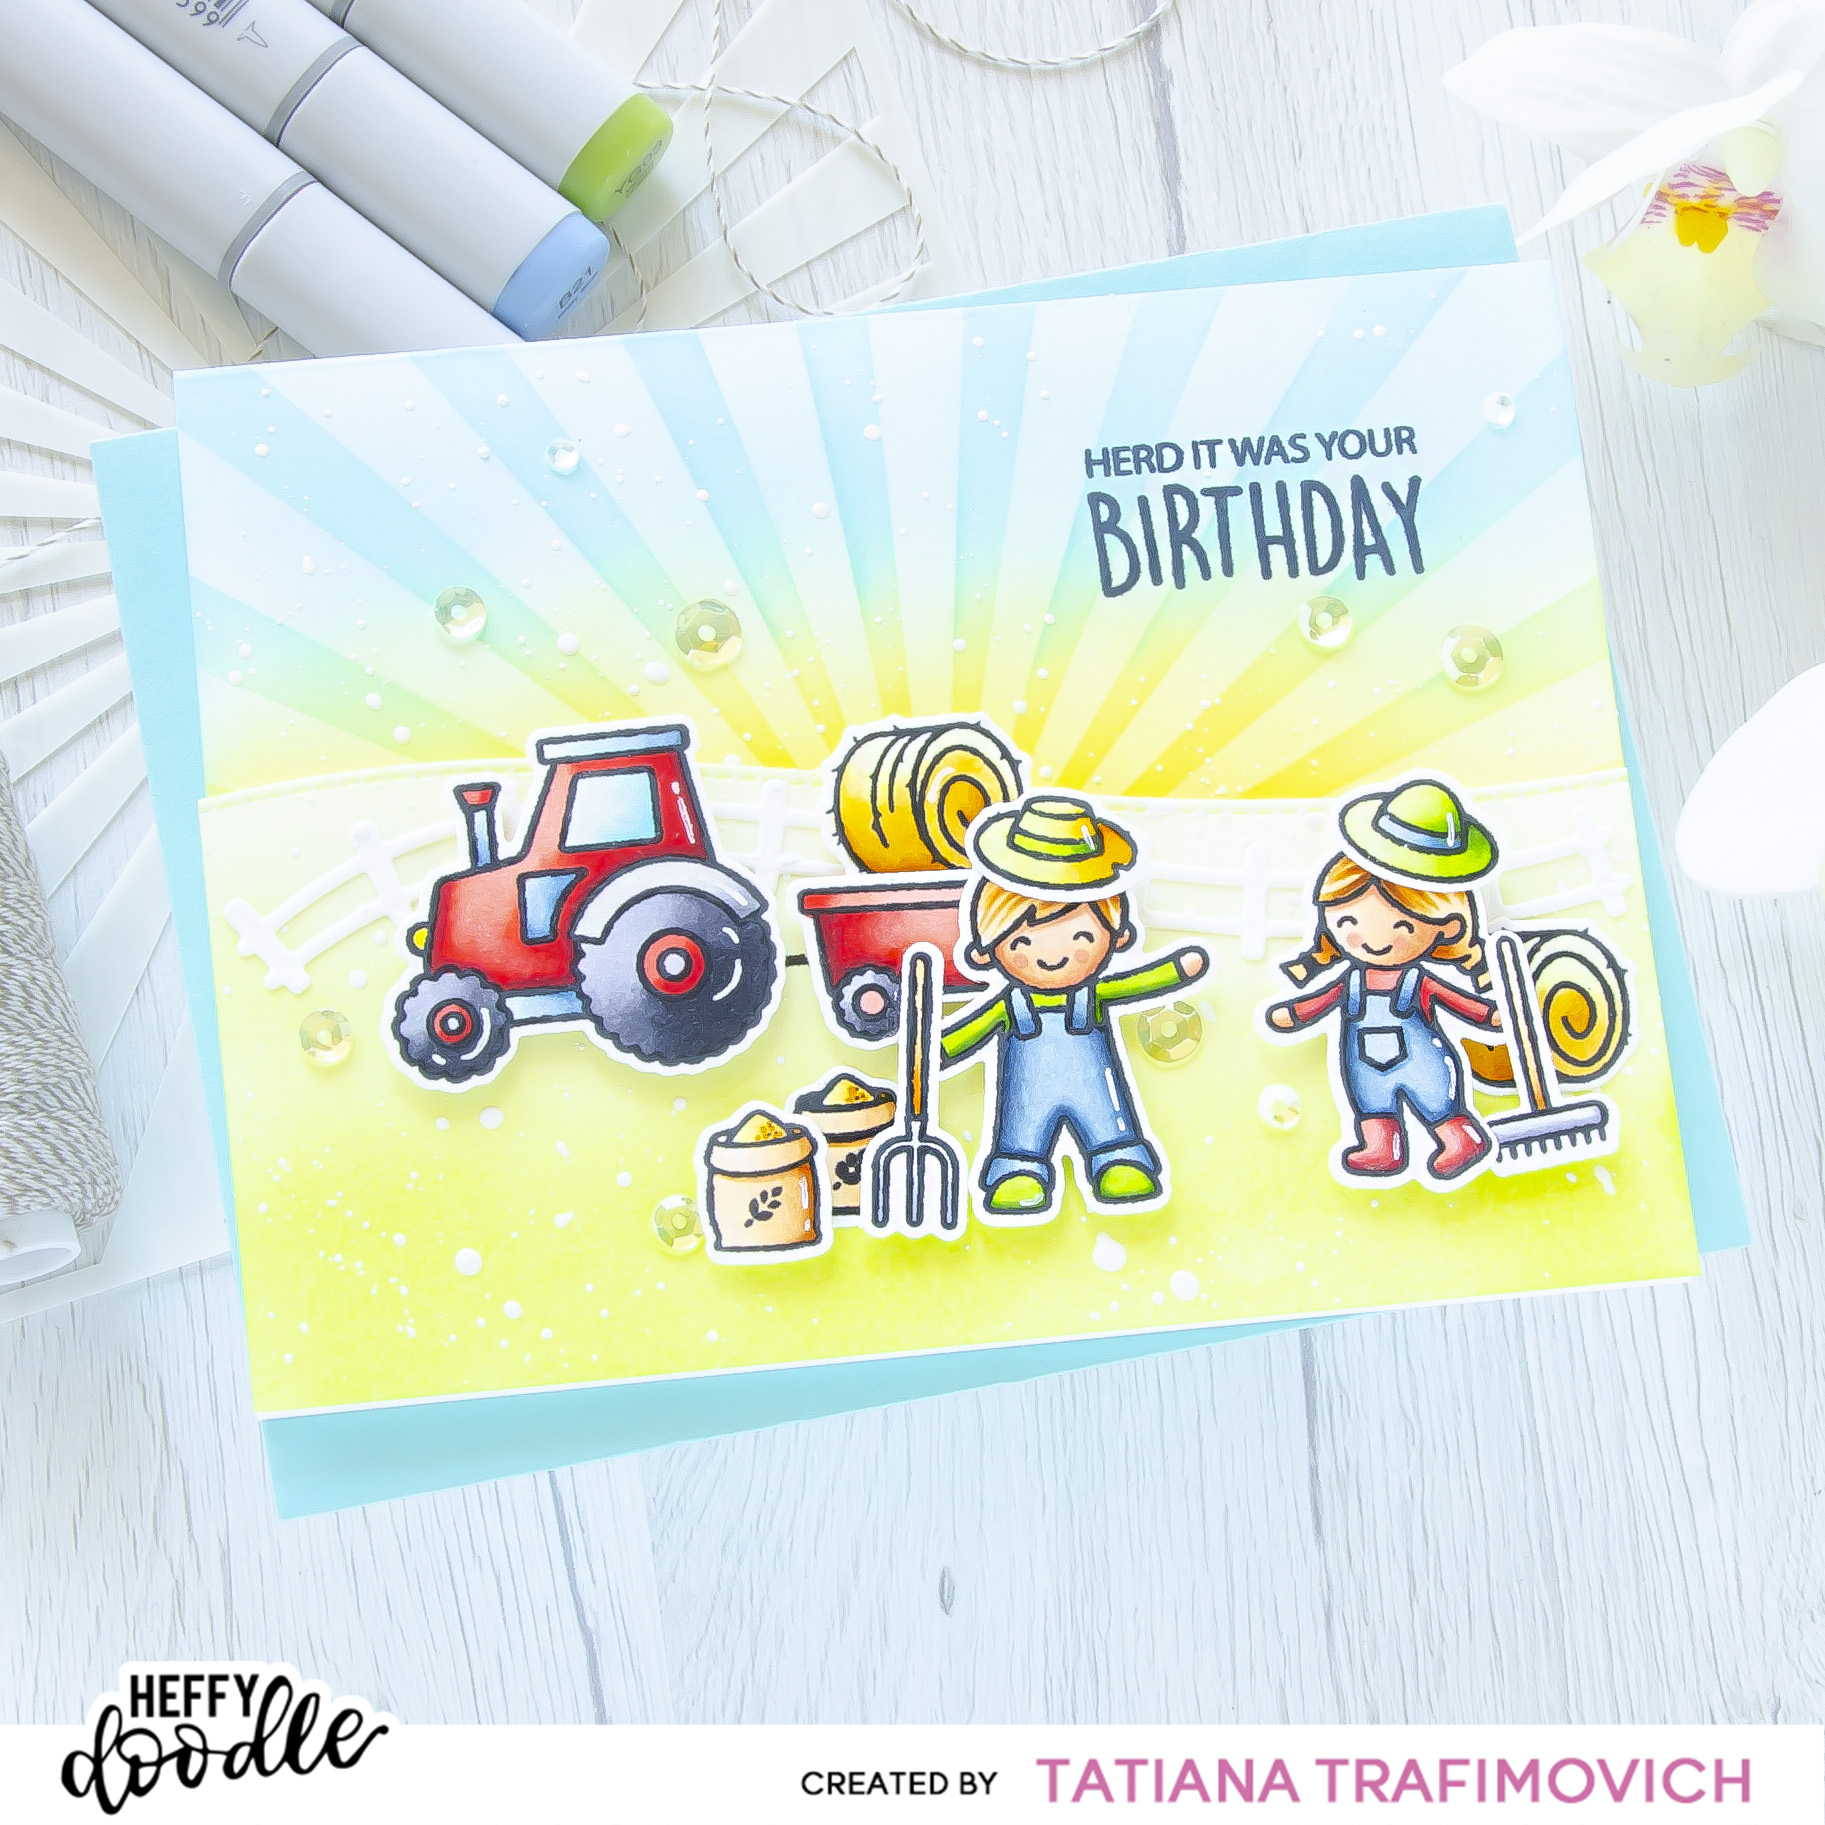 Herd It Was Your Birthday #handmade card by Tatiana Trafimovich #tatianacraftandart - stamps and dies by Heffy Doodle #heffydoodle